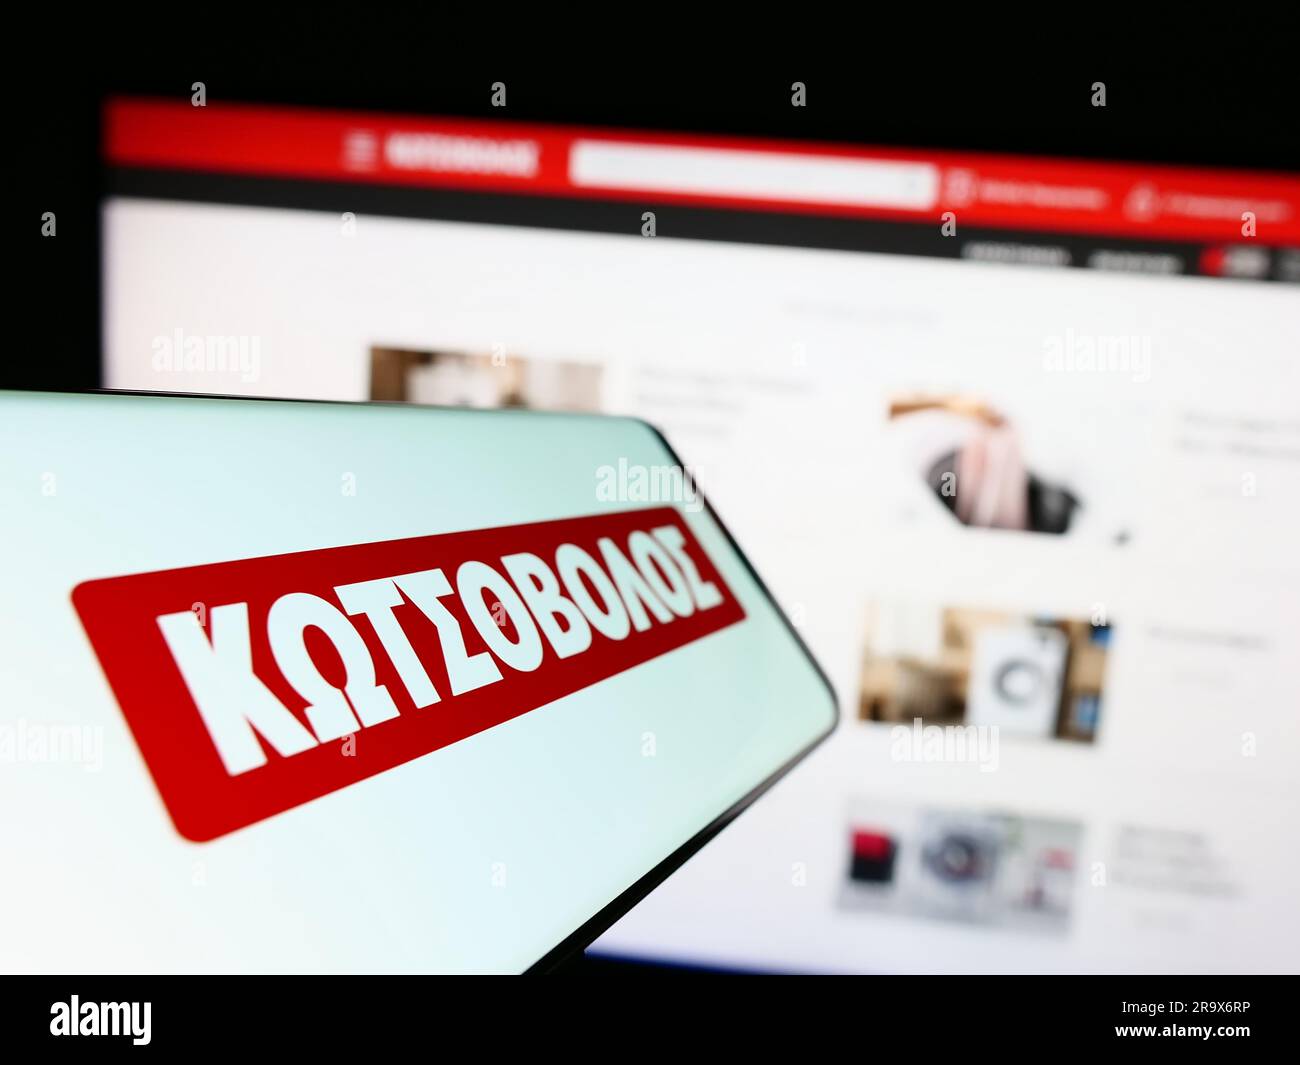 Mobile phone with logo of Greek electronics retail company Kotsovolos on screen in front of website. Focus on center-left of phone display. Stock Photo